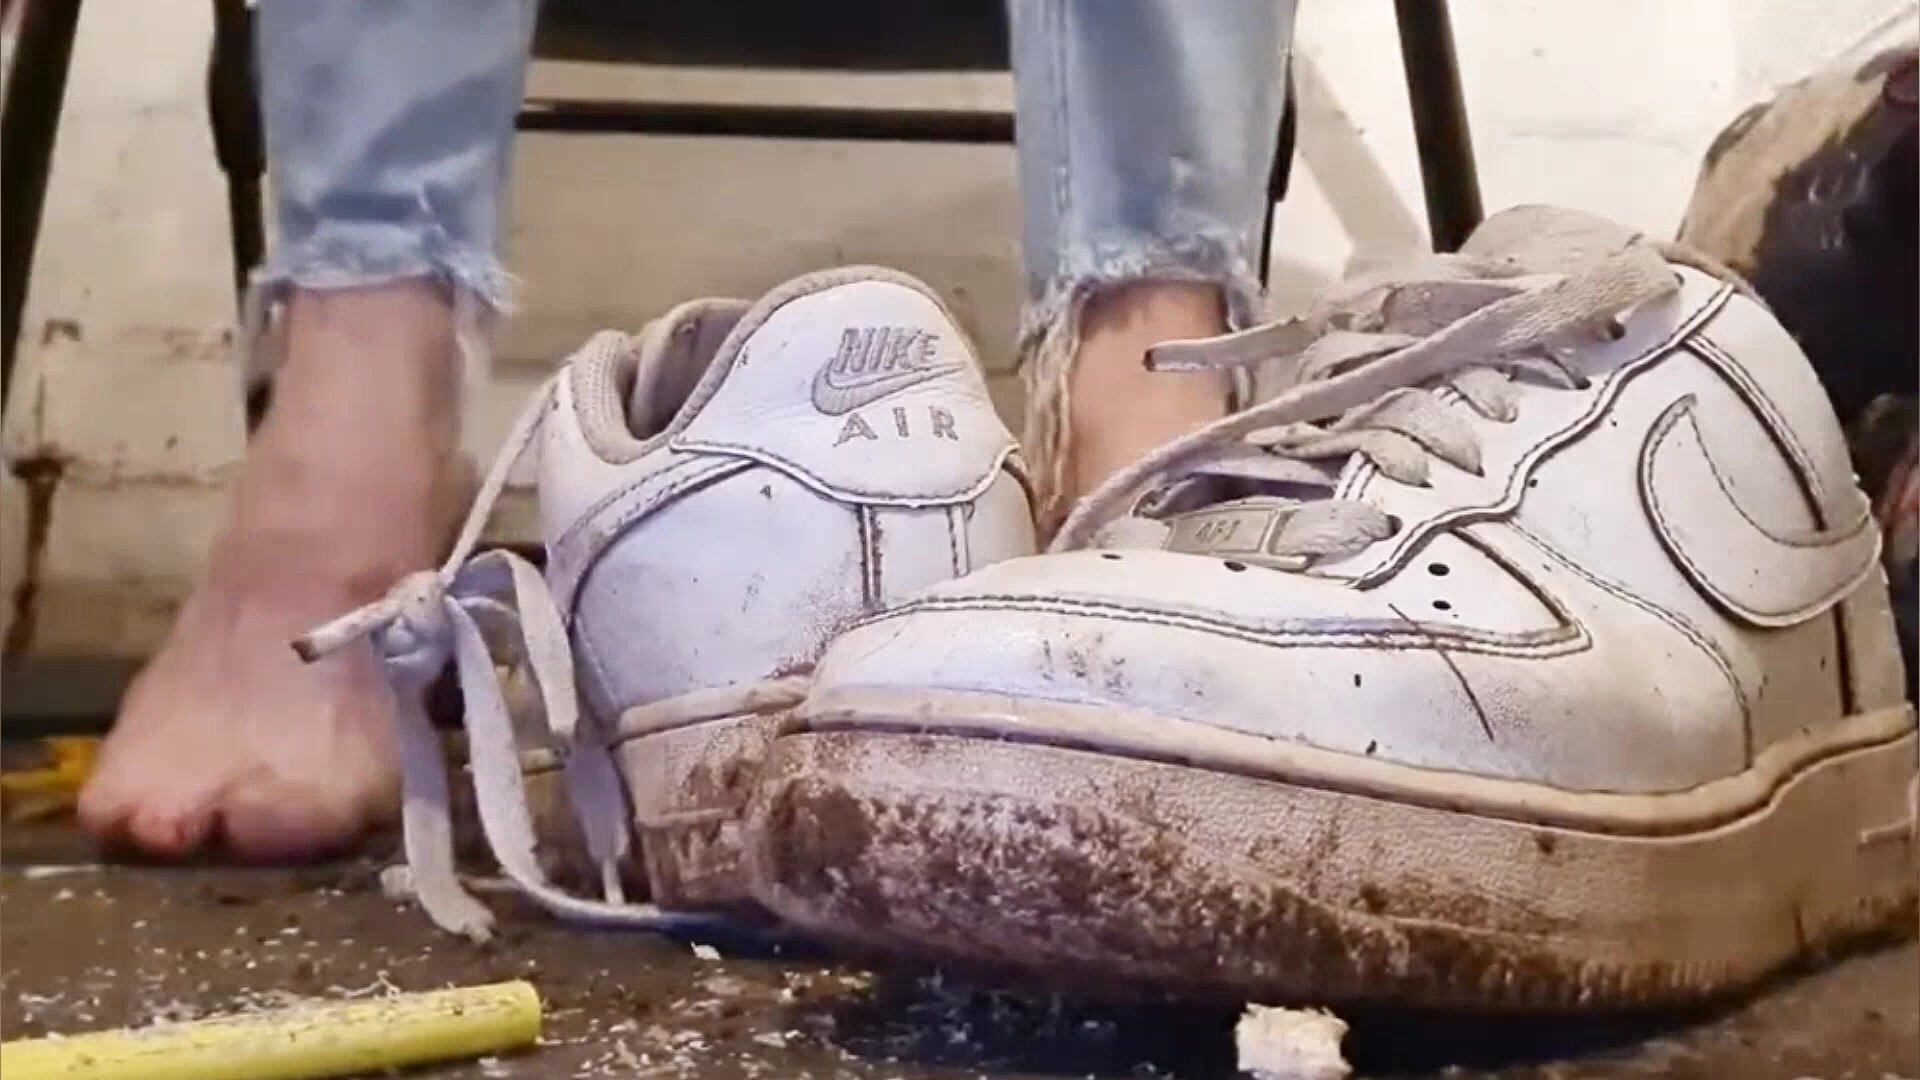 Air Force one Sneaker messy and dirty